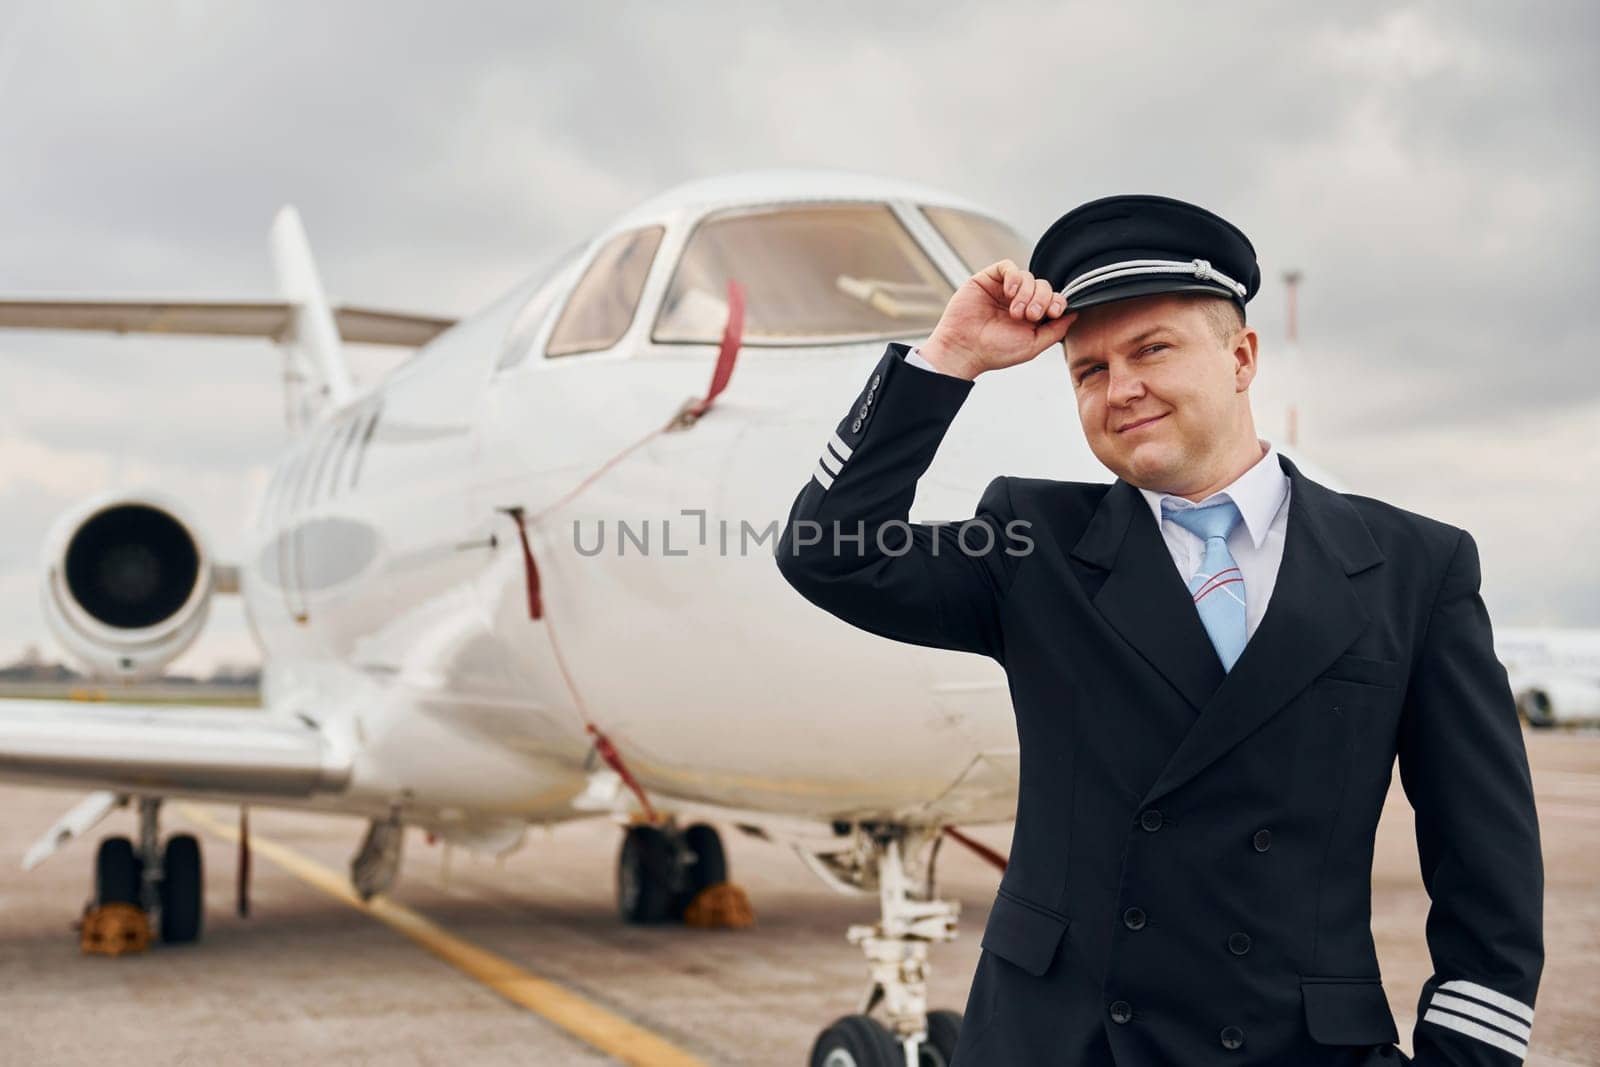 Posing for a camera. Experienced pilot in uniform standing outside near plane by Standret